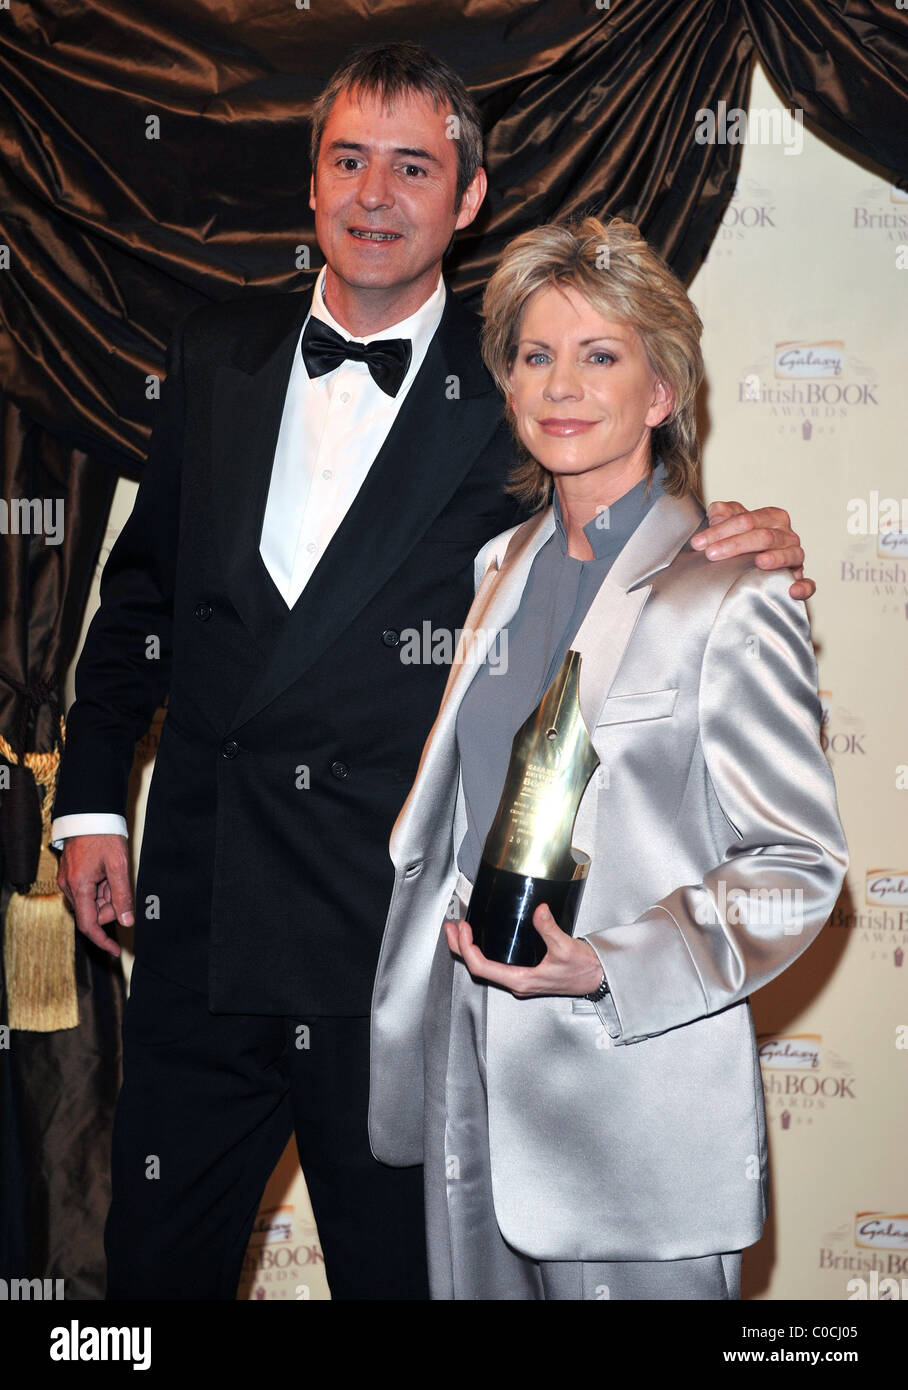 Patricia Cornwell and David Morrissey Galaxy British Book Awards held at  the Grosvenor House - Arrivals London, England Stock Photo - Alamy